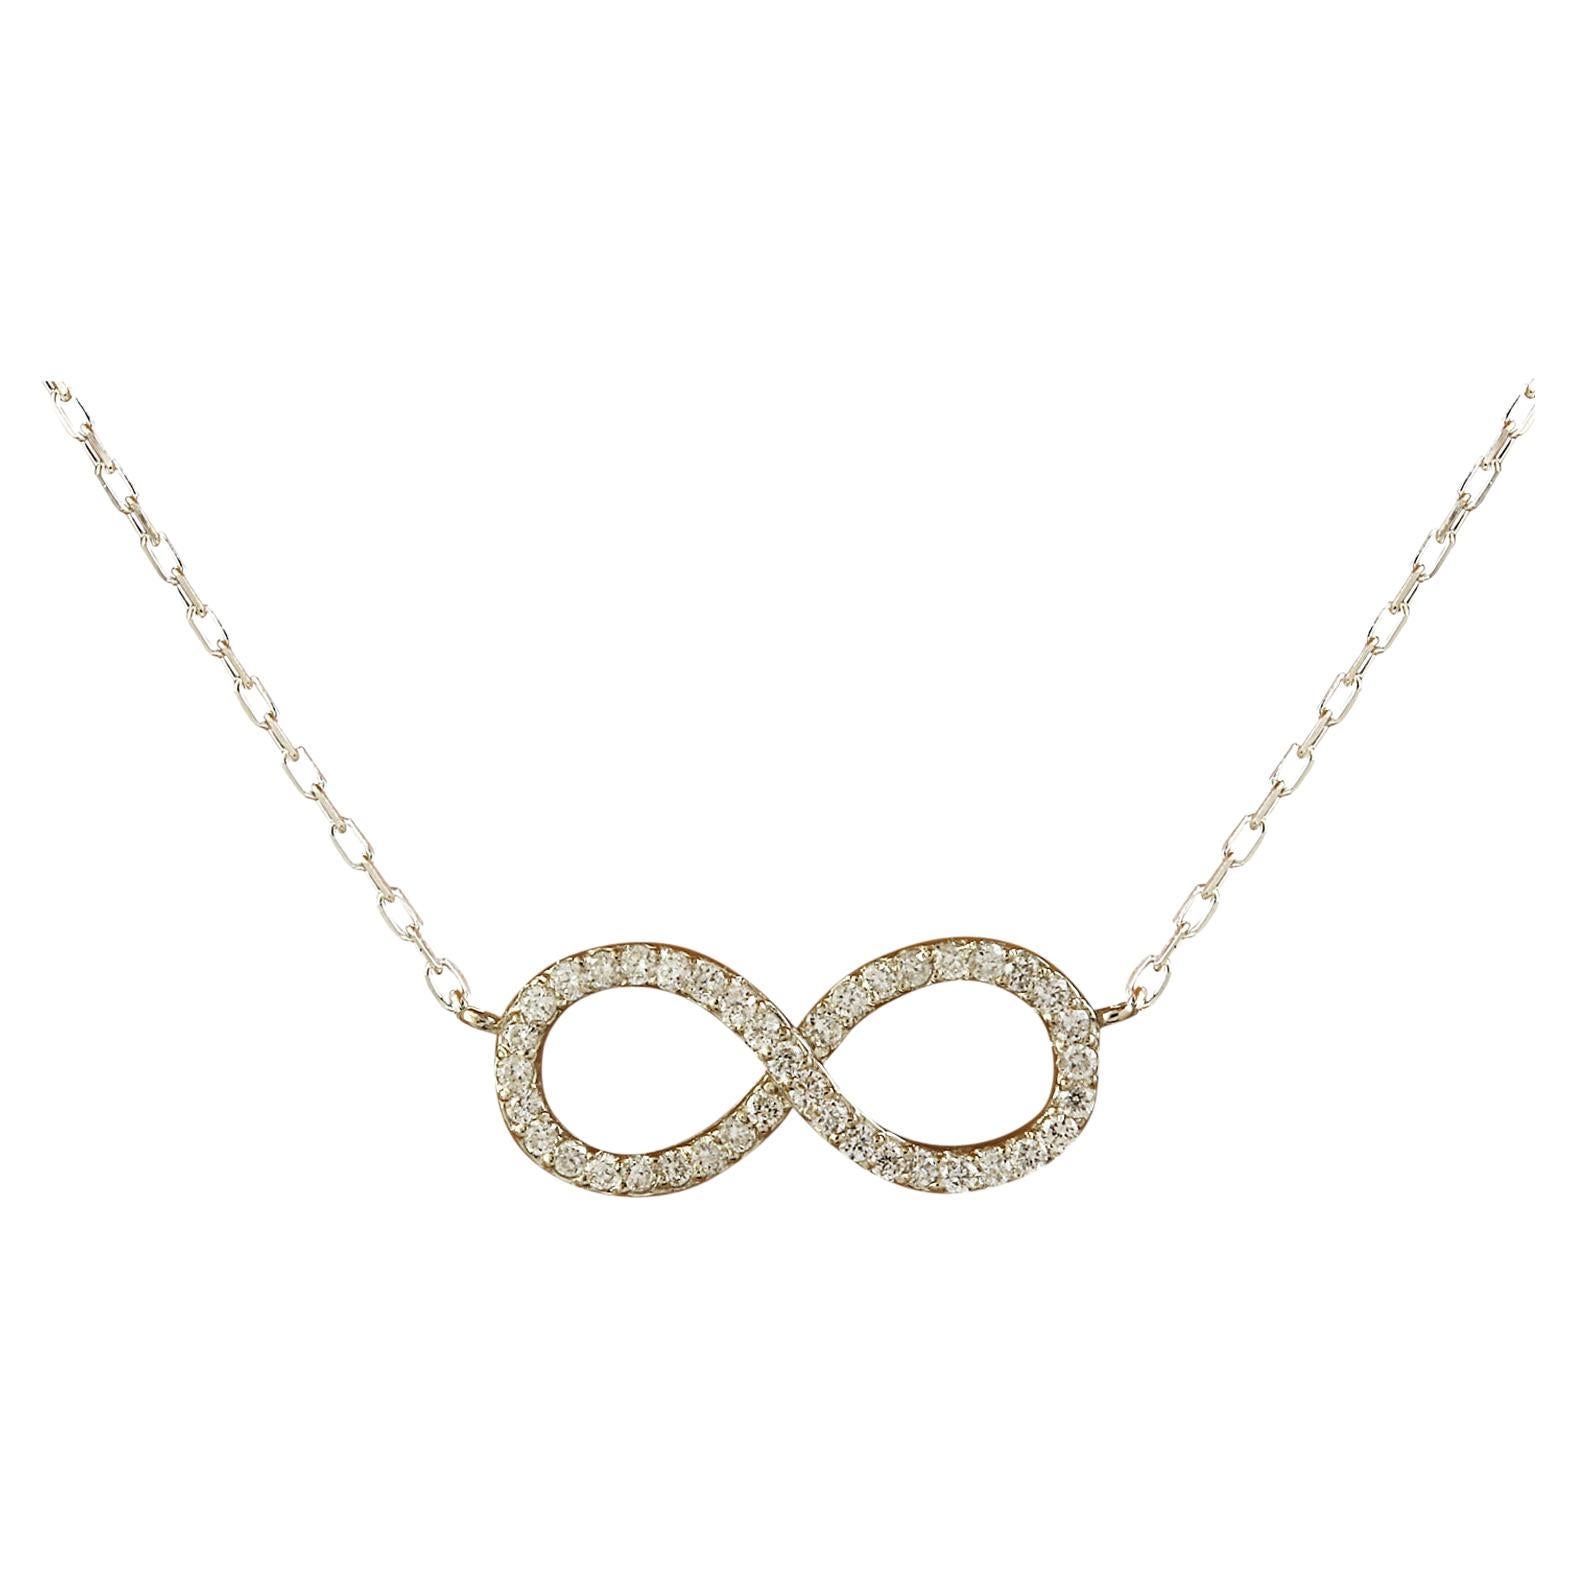 Exquisite Natural Diamond Infinity Necklace In 14 Karat White Gold 